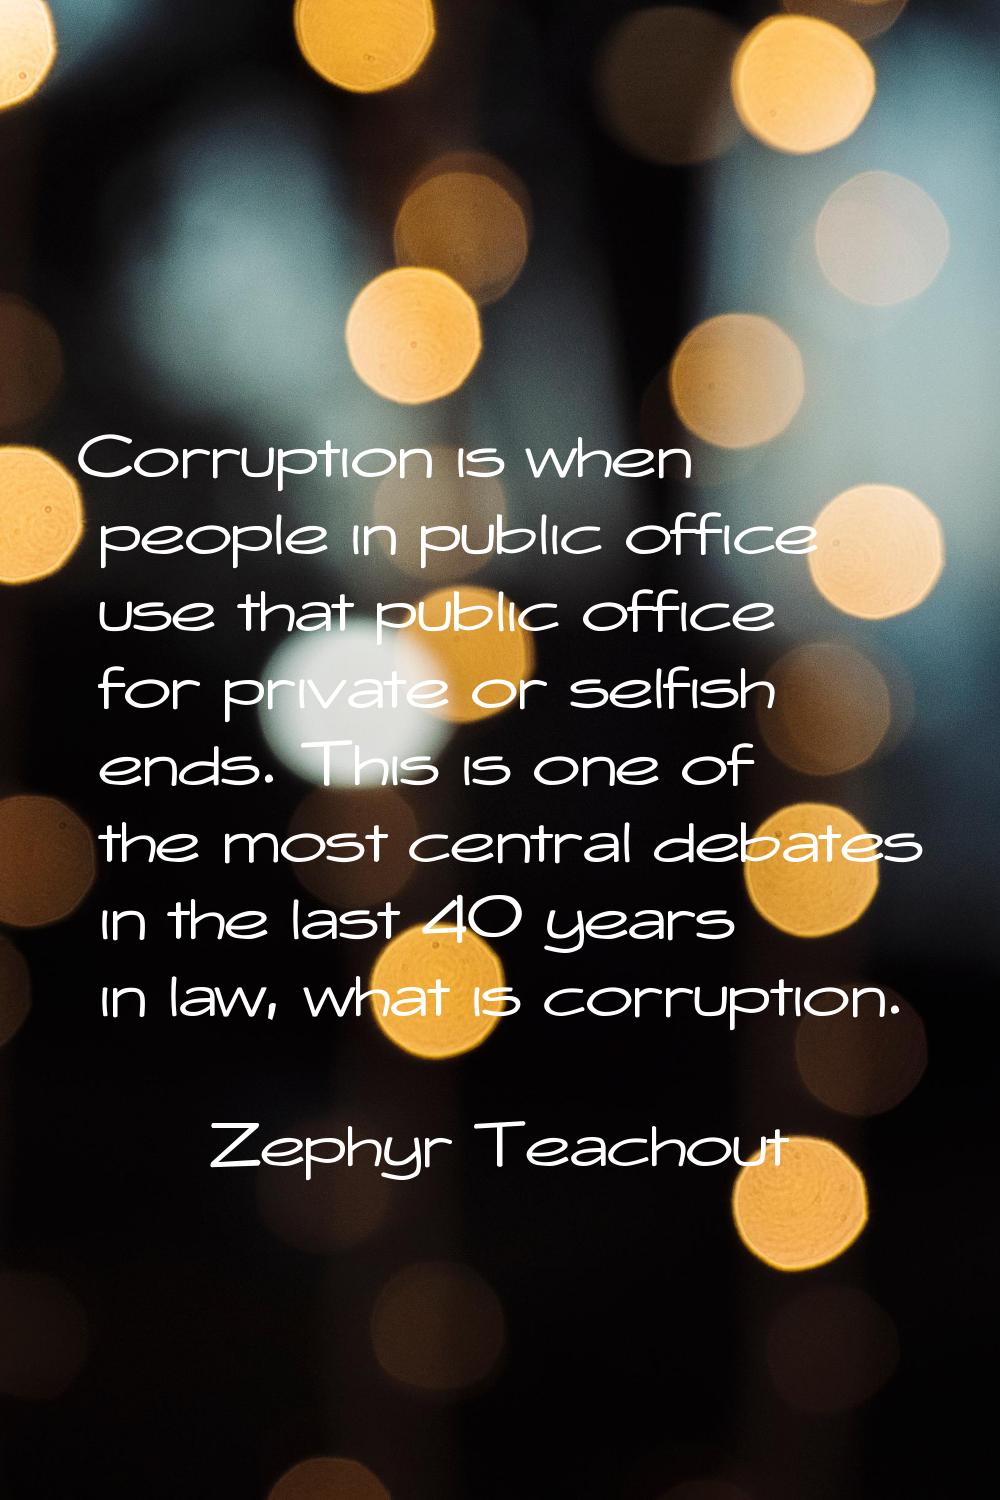 Corruption is when people in public office use that public office for private or selfish ends. This